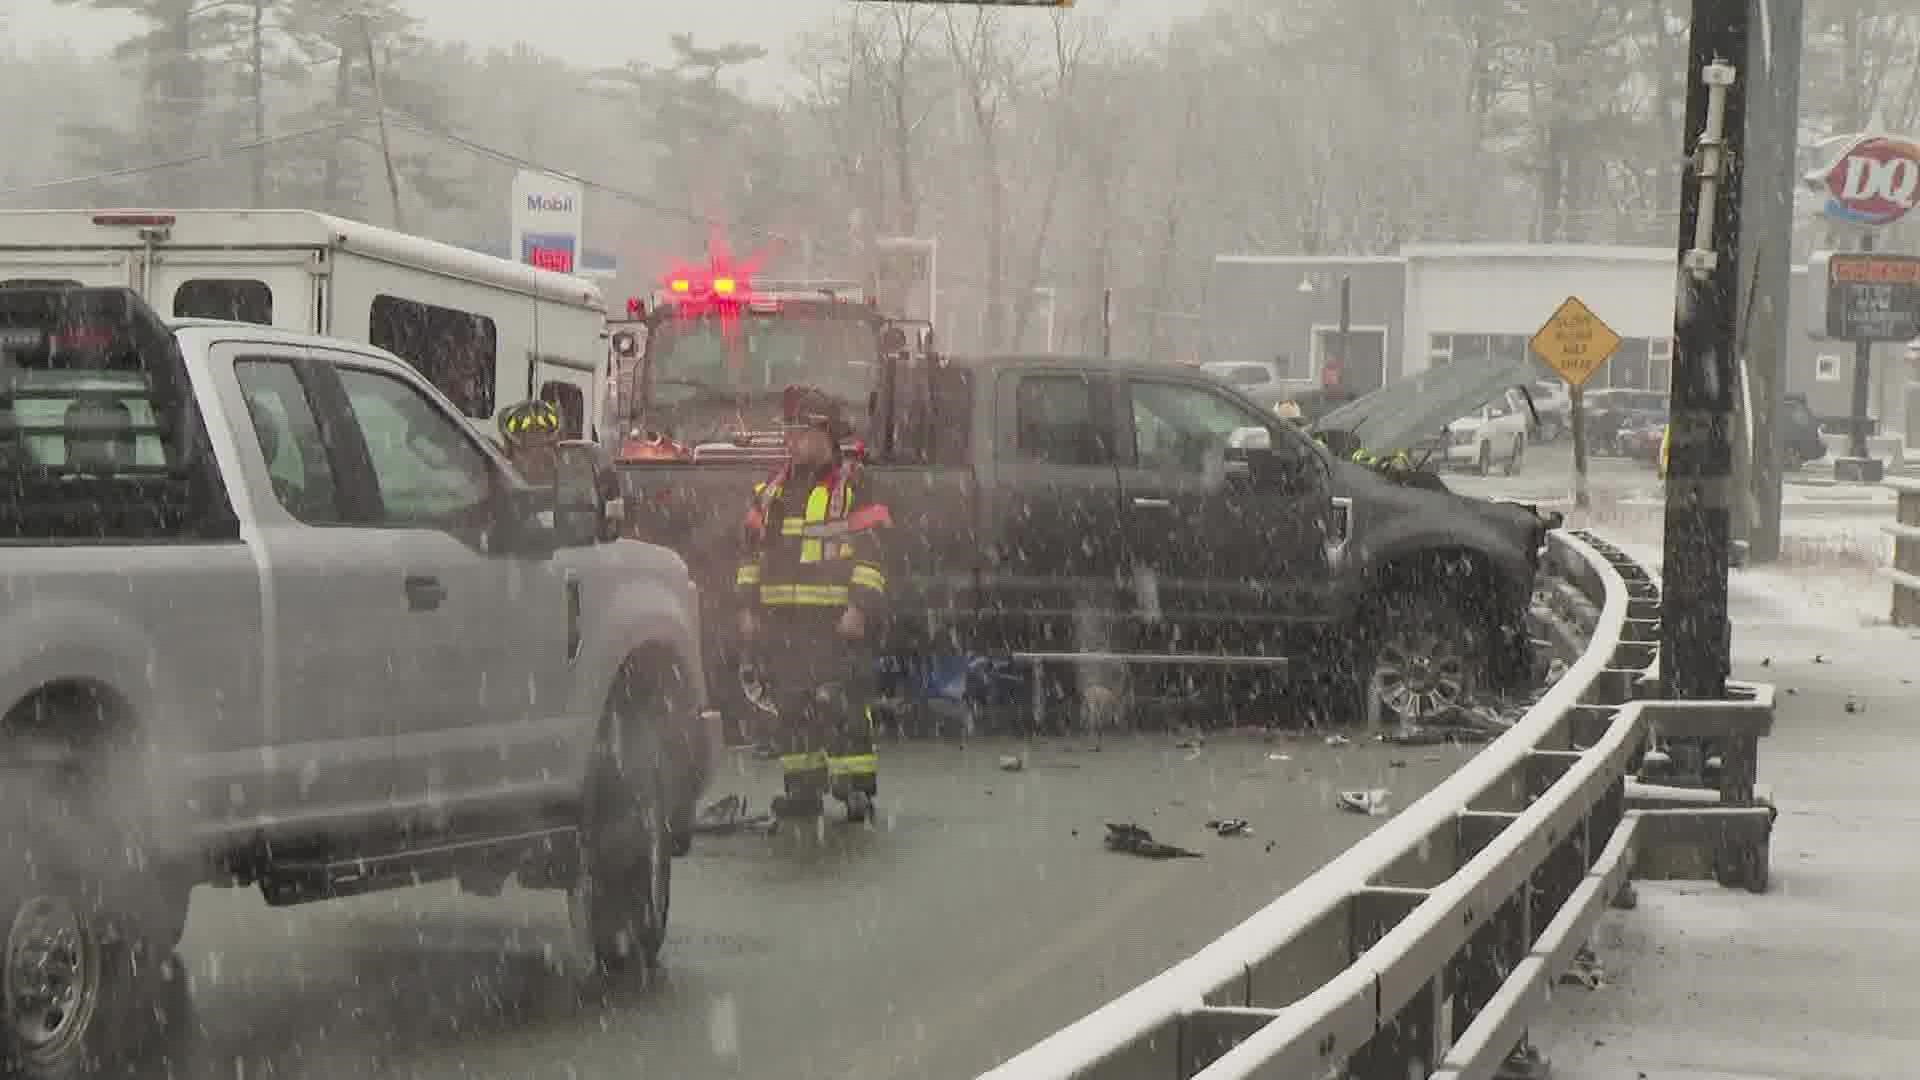 The crash was reported around 12:42 p.m. Friday and involved two vehicles, according to Sagadahoc County dispatch.